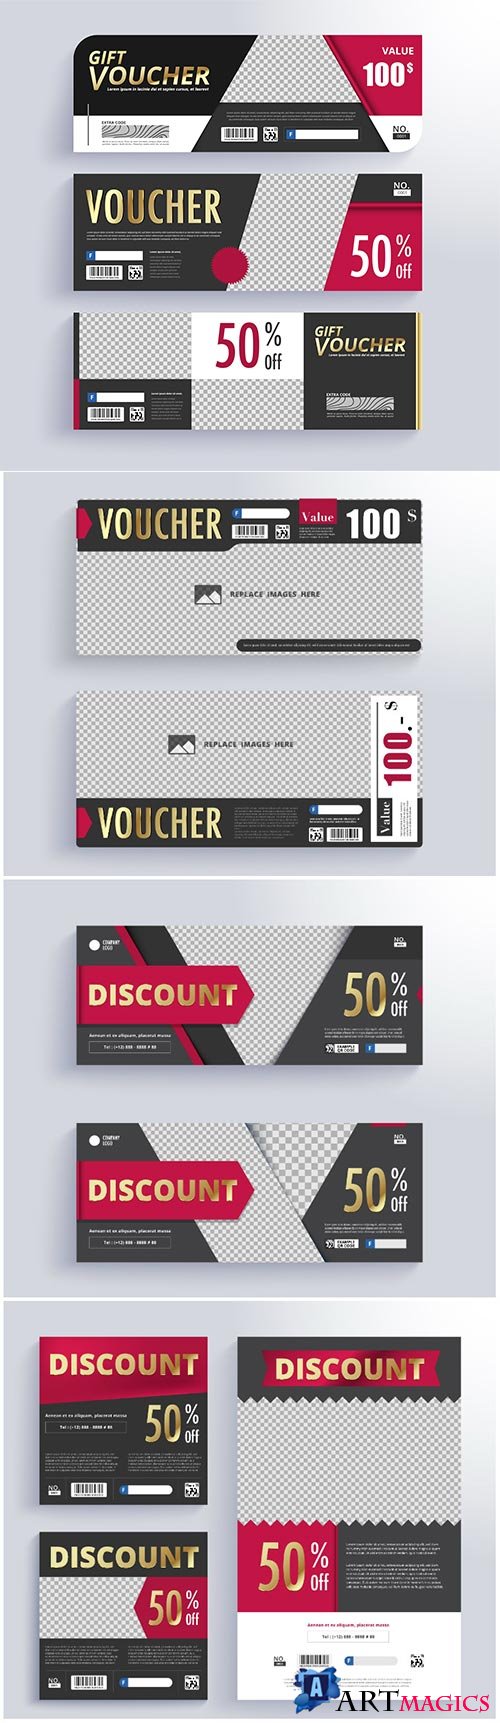 Gift voucher vector template, blank space for images